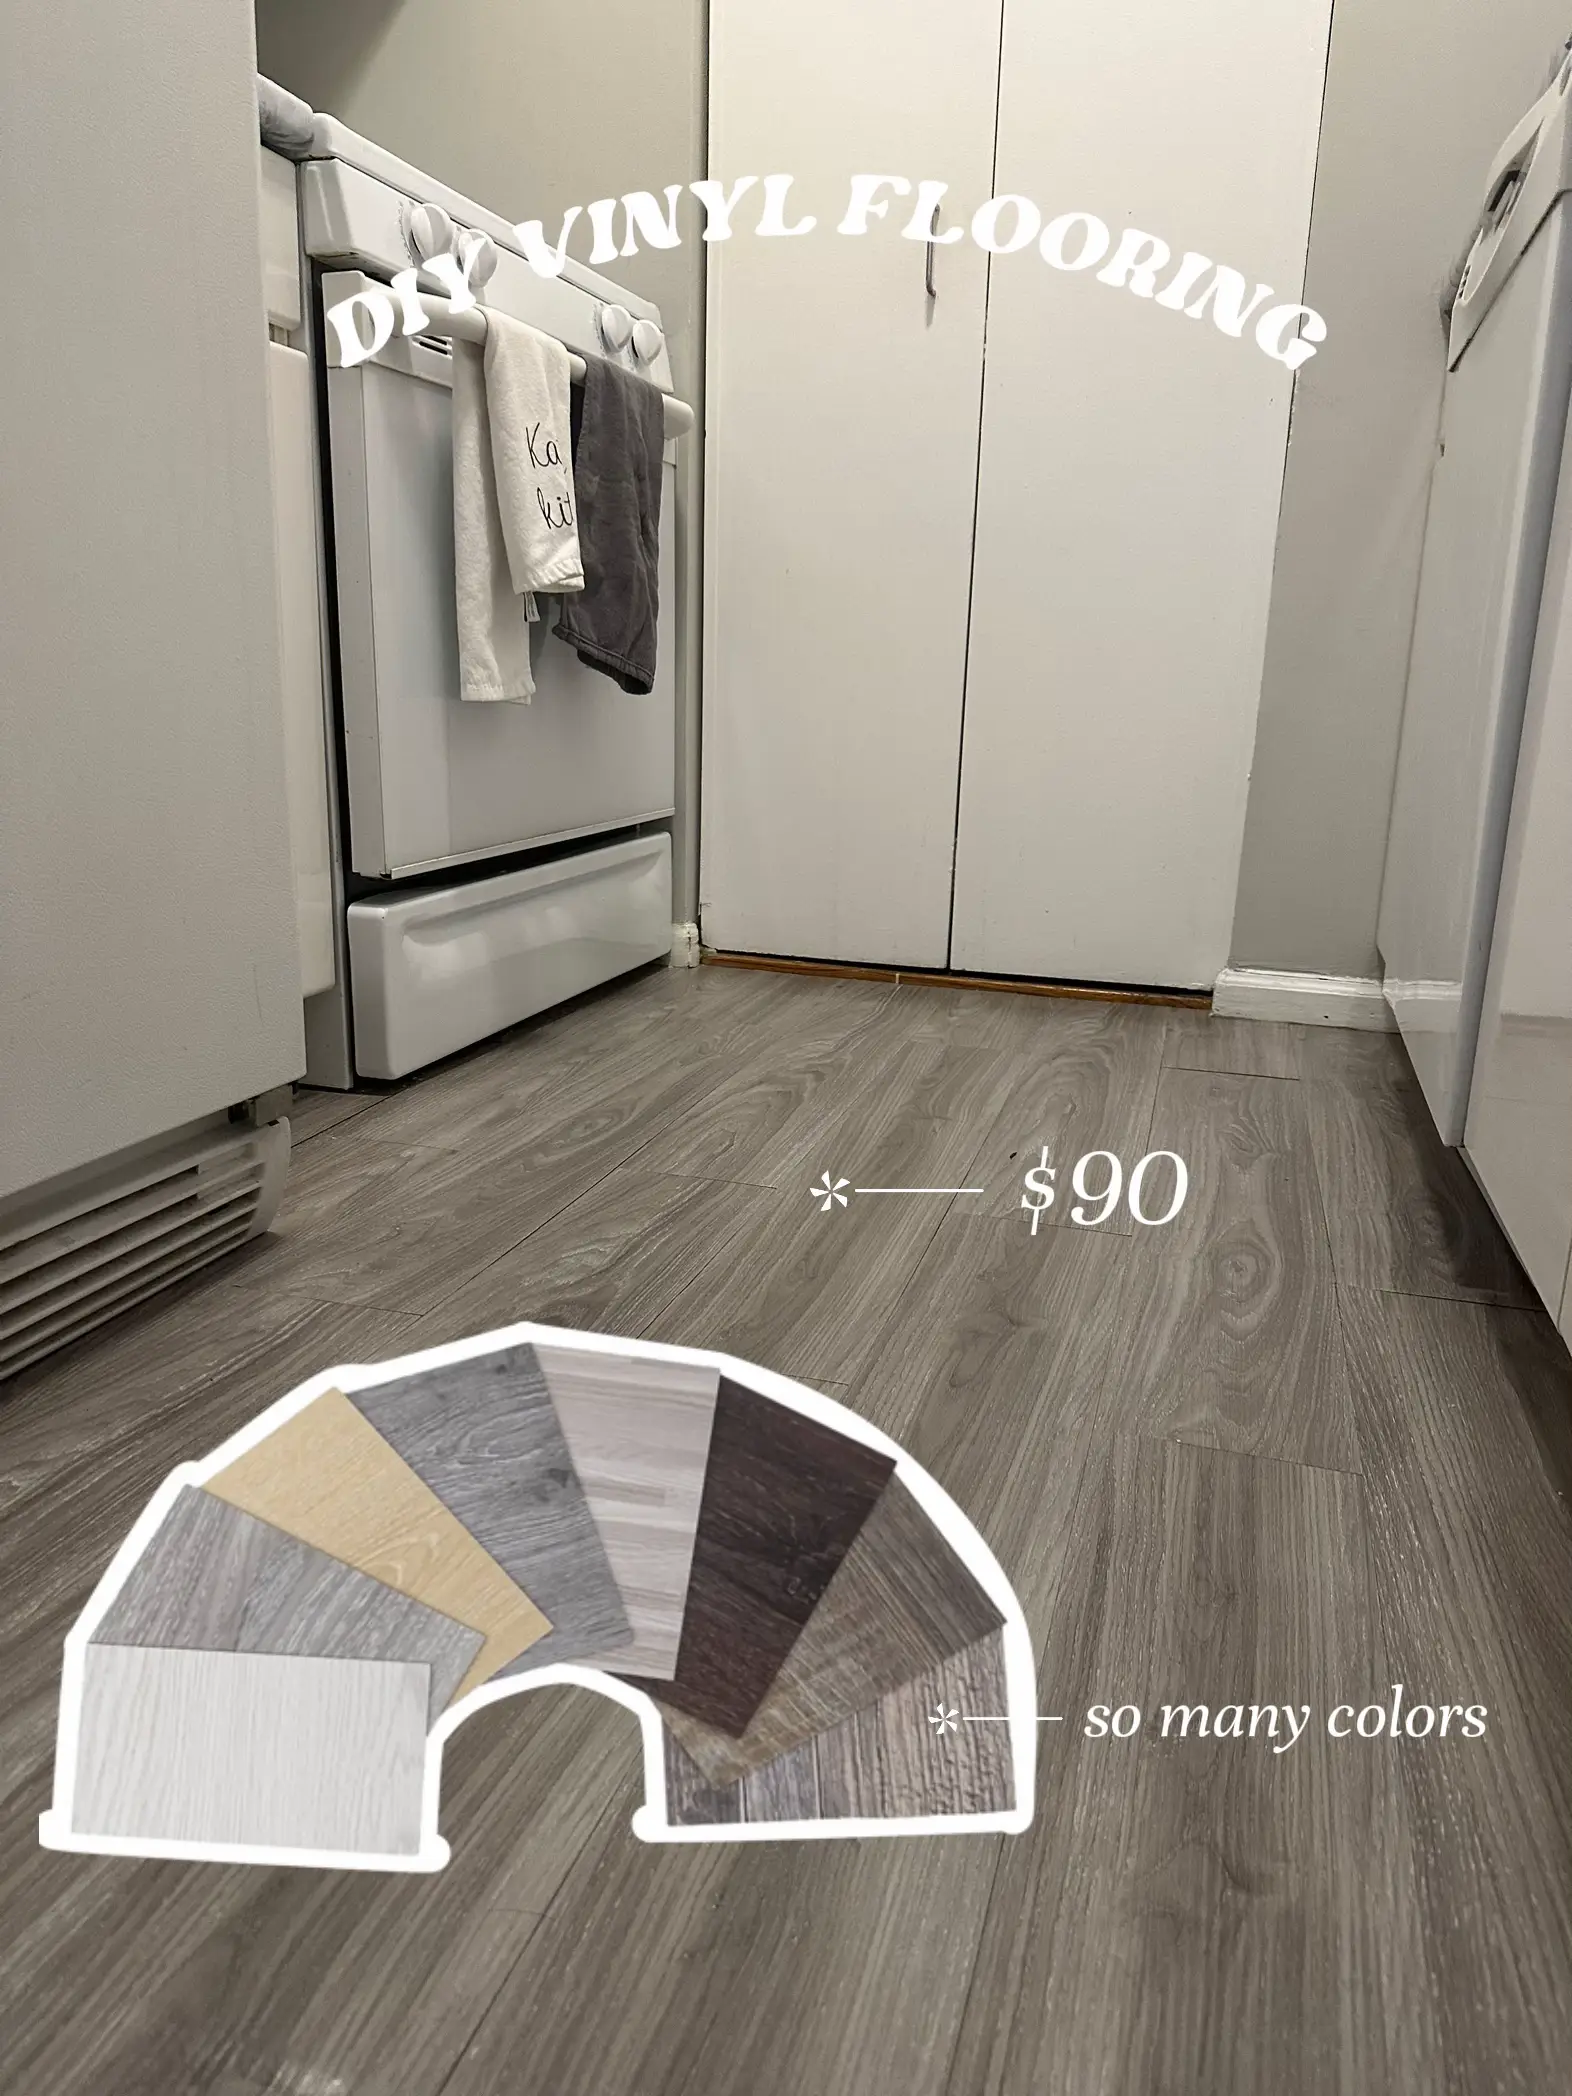 Any renter-friendly ideas on how up brighten up and update this bathroom? I  officially move in tomorrow, so sorry for the funky fish-eye screenshot  from the rental company 😩 I already have